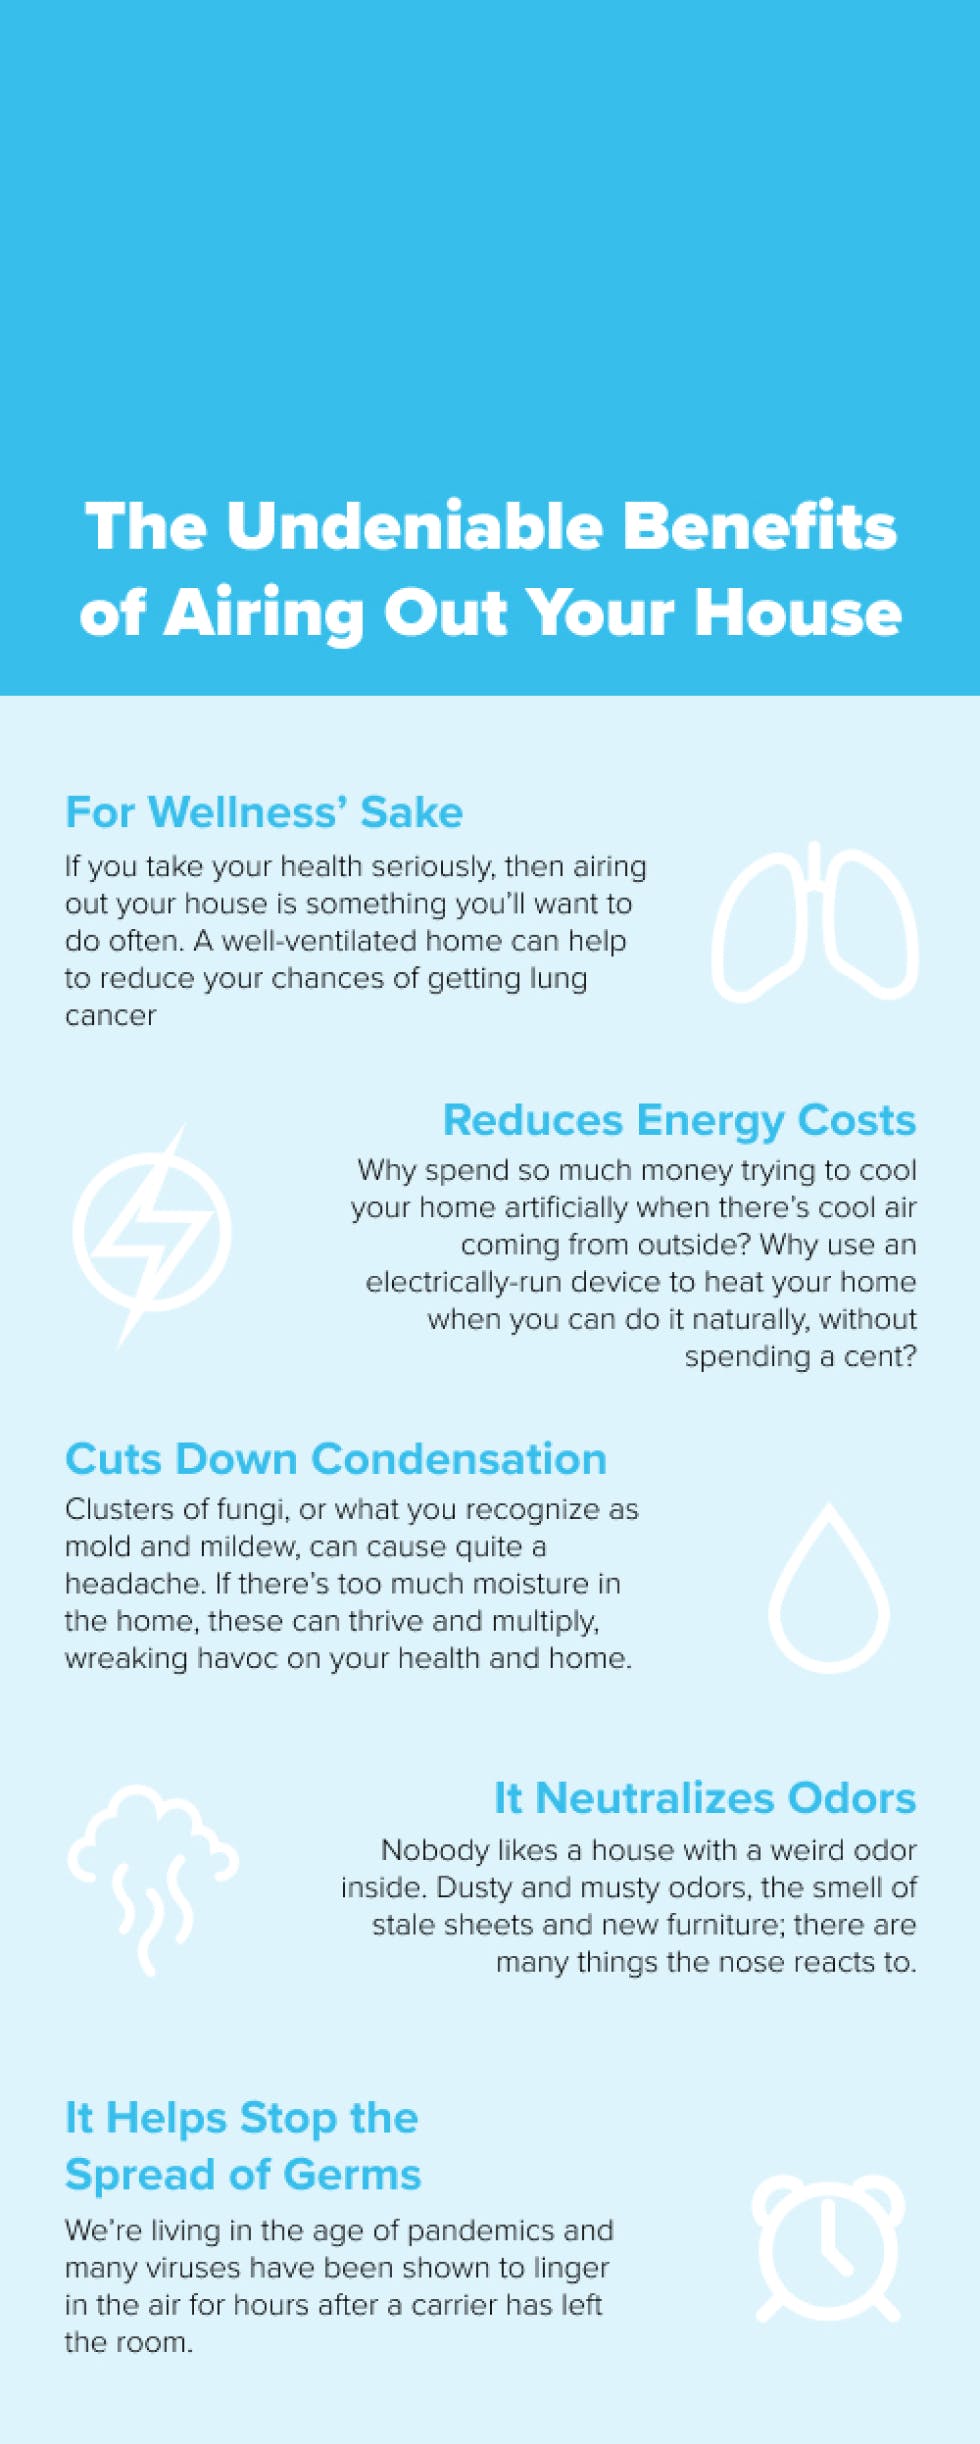 Benefits of airing out your house infographic